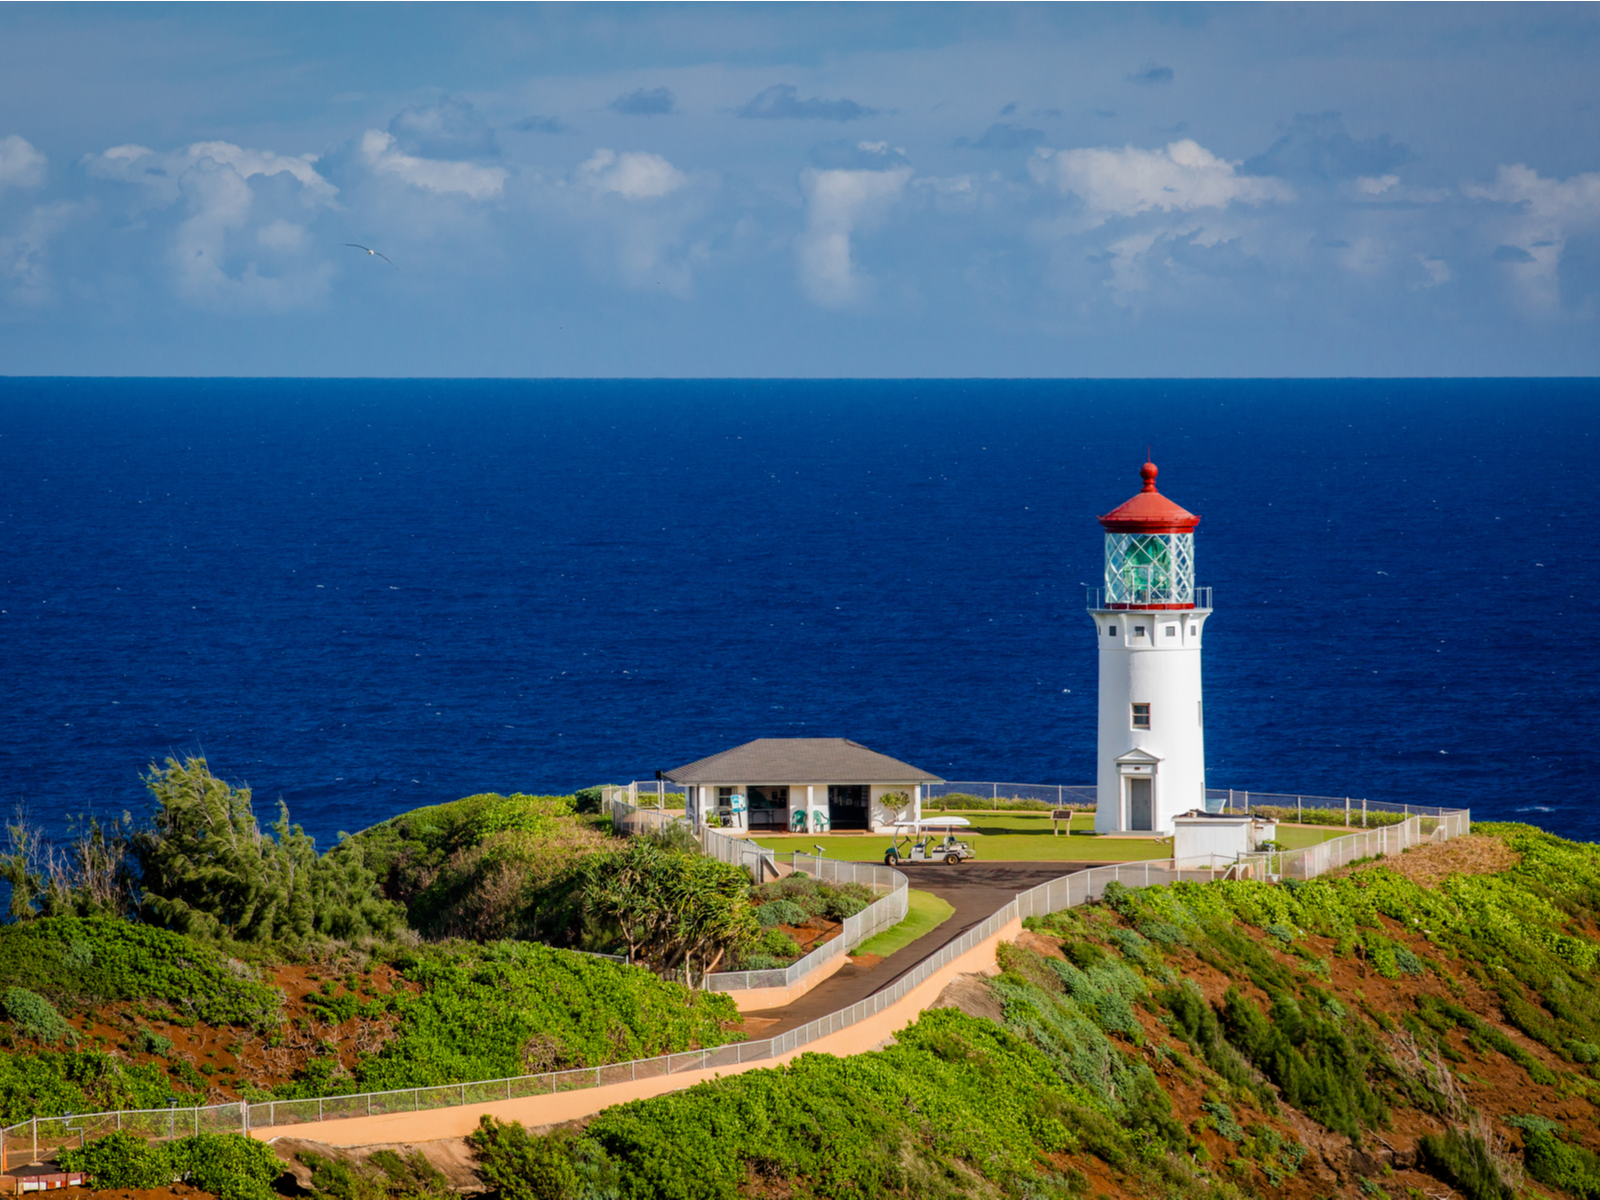 The Kilauea Lighthouse with a house and a gulf cart sits beside a blue calm open sea, one of the best things to do in Kauai